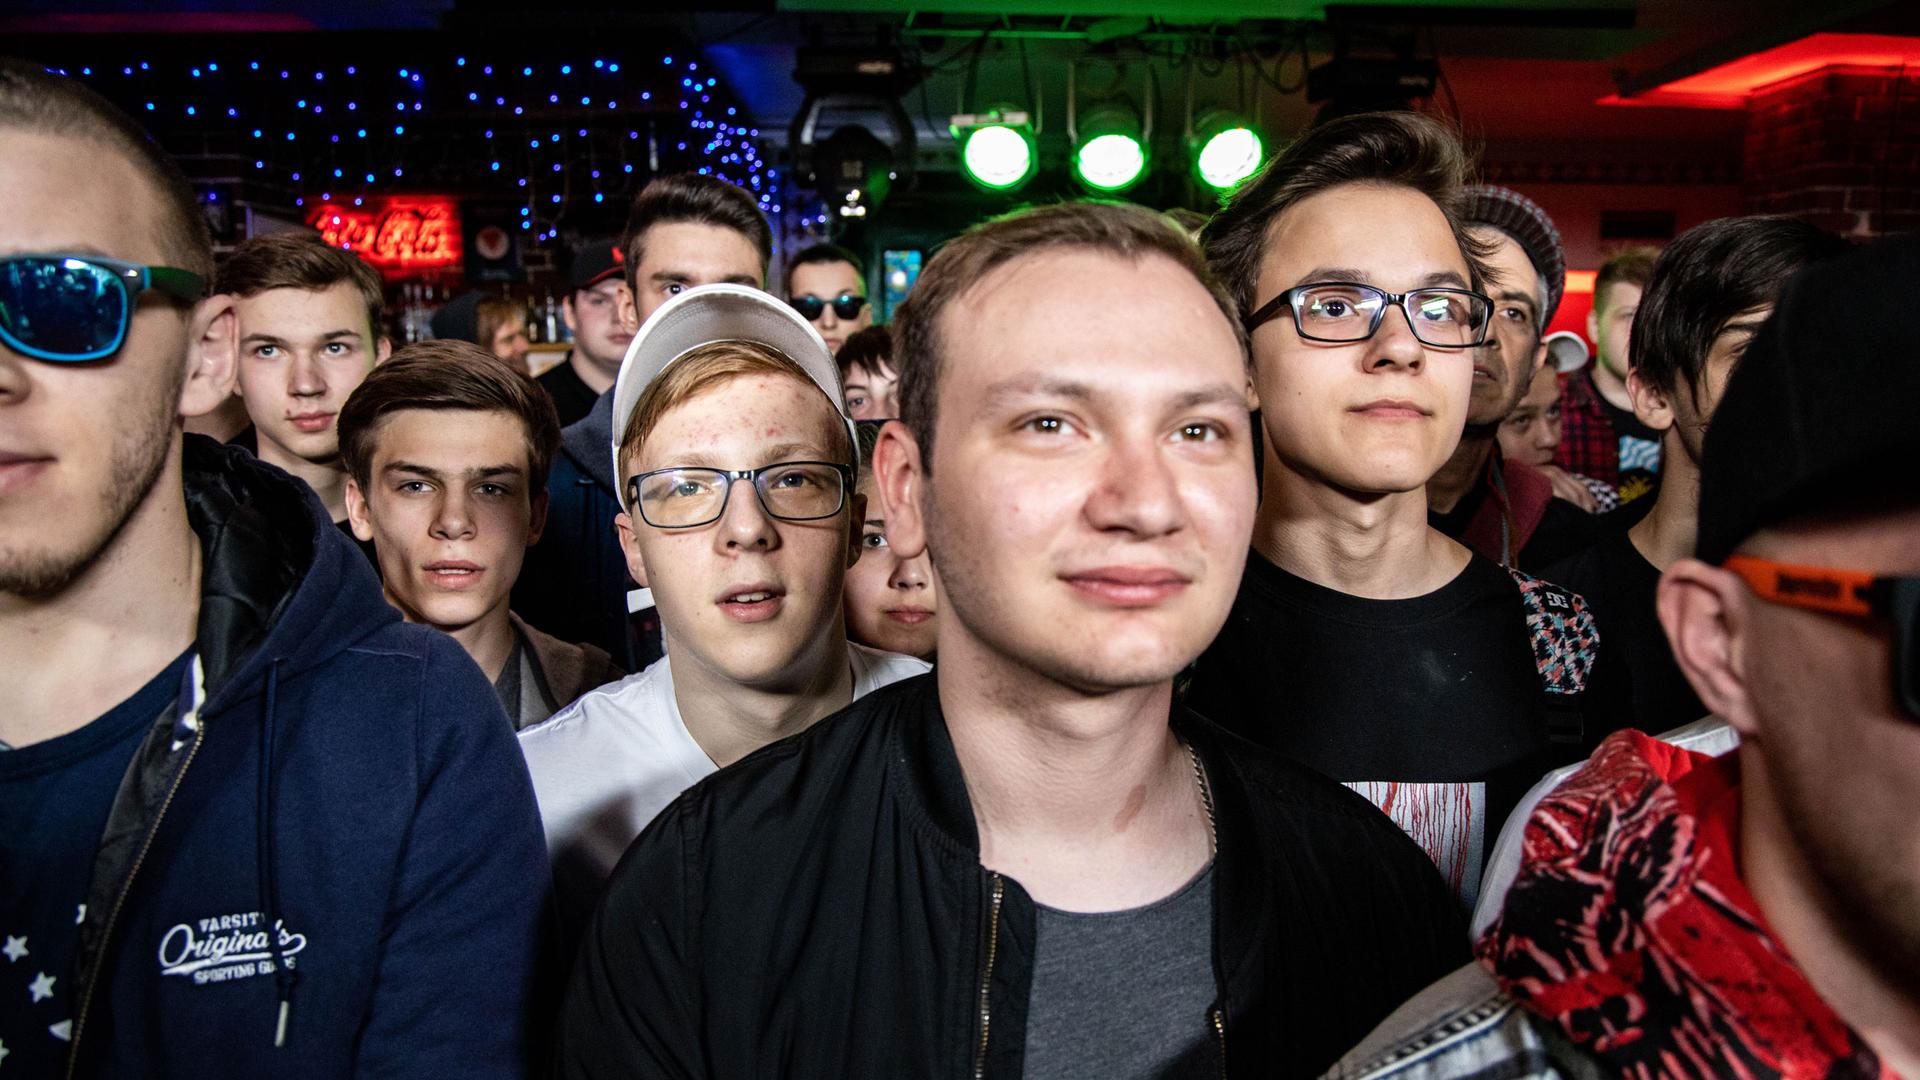 Several young men are shown looking past the camera with some wearing glasses.